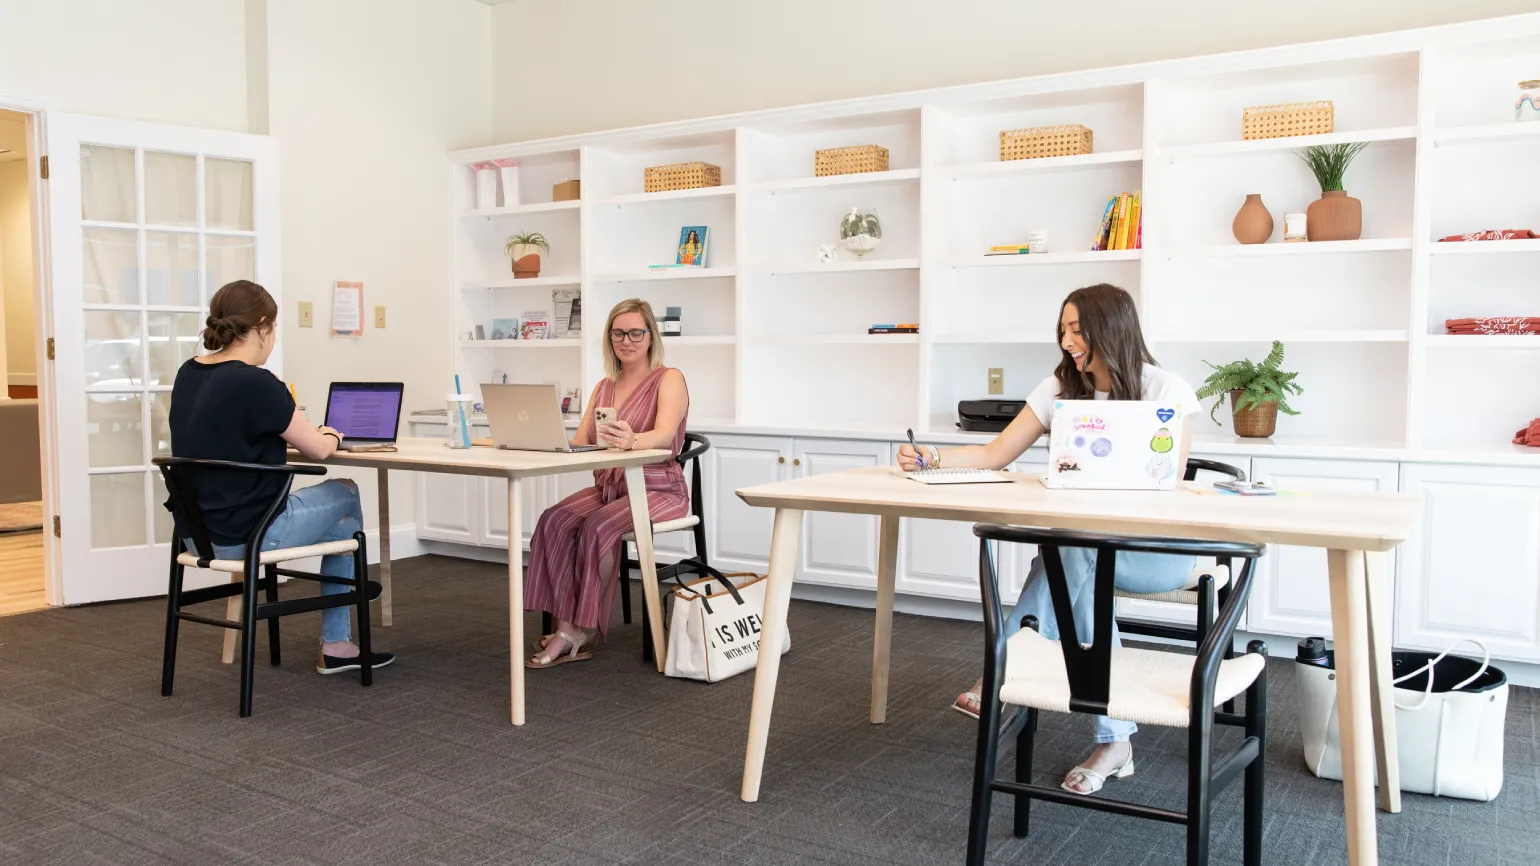 Elevate Coworking Community uses Optix for member management and driving sign ups through widget